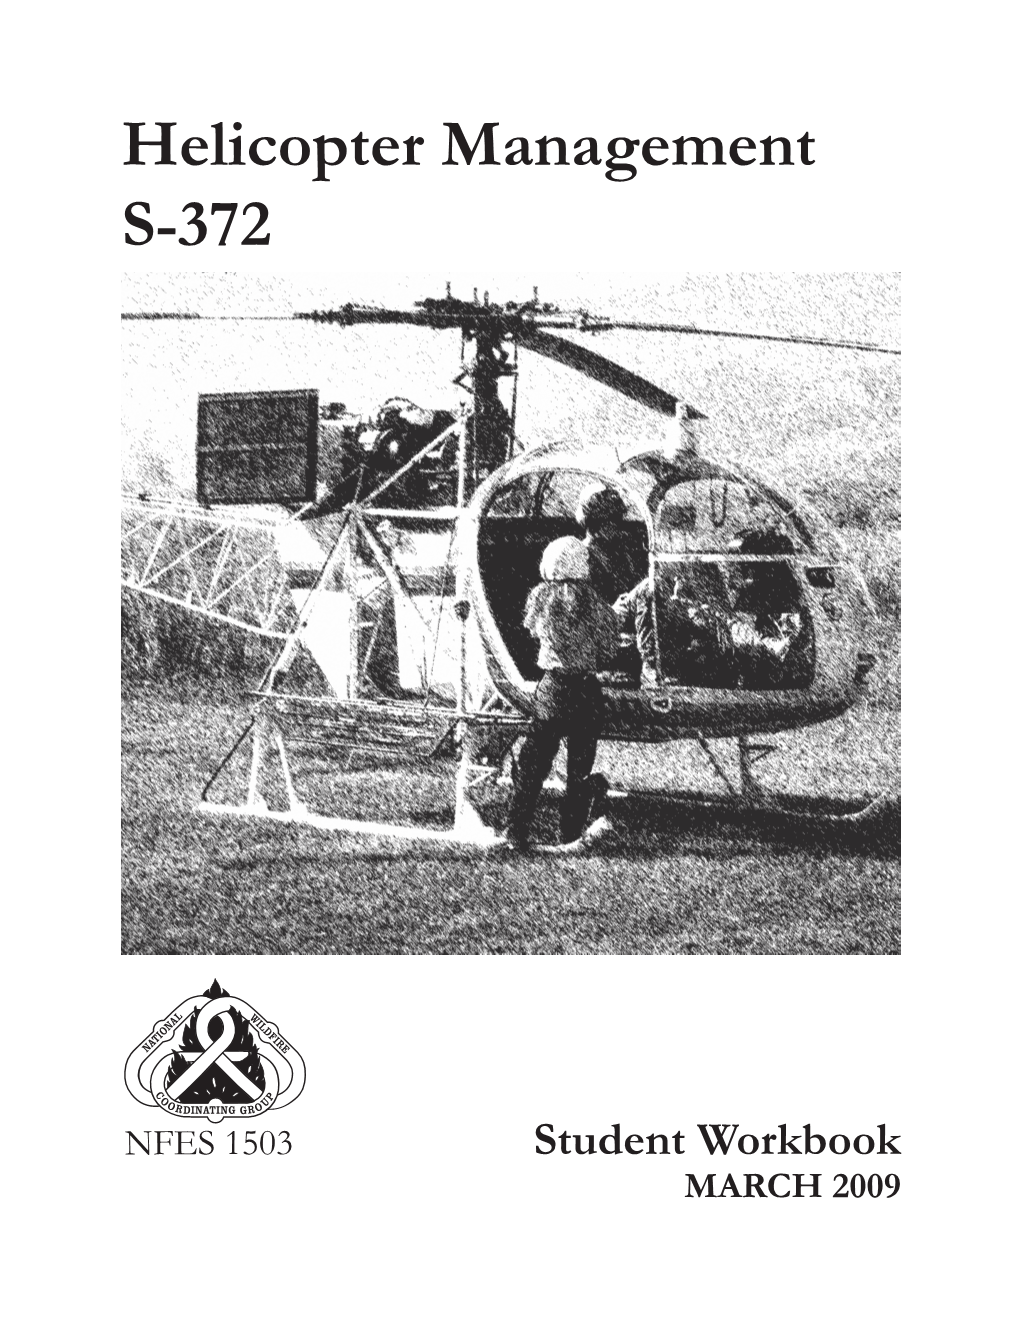 Helicopter Management S-372